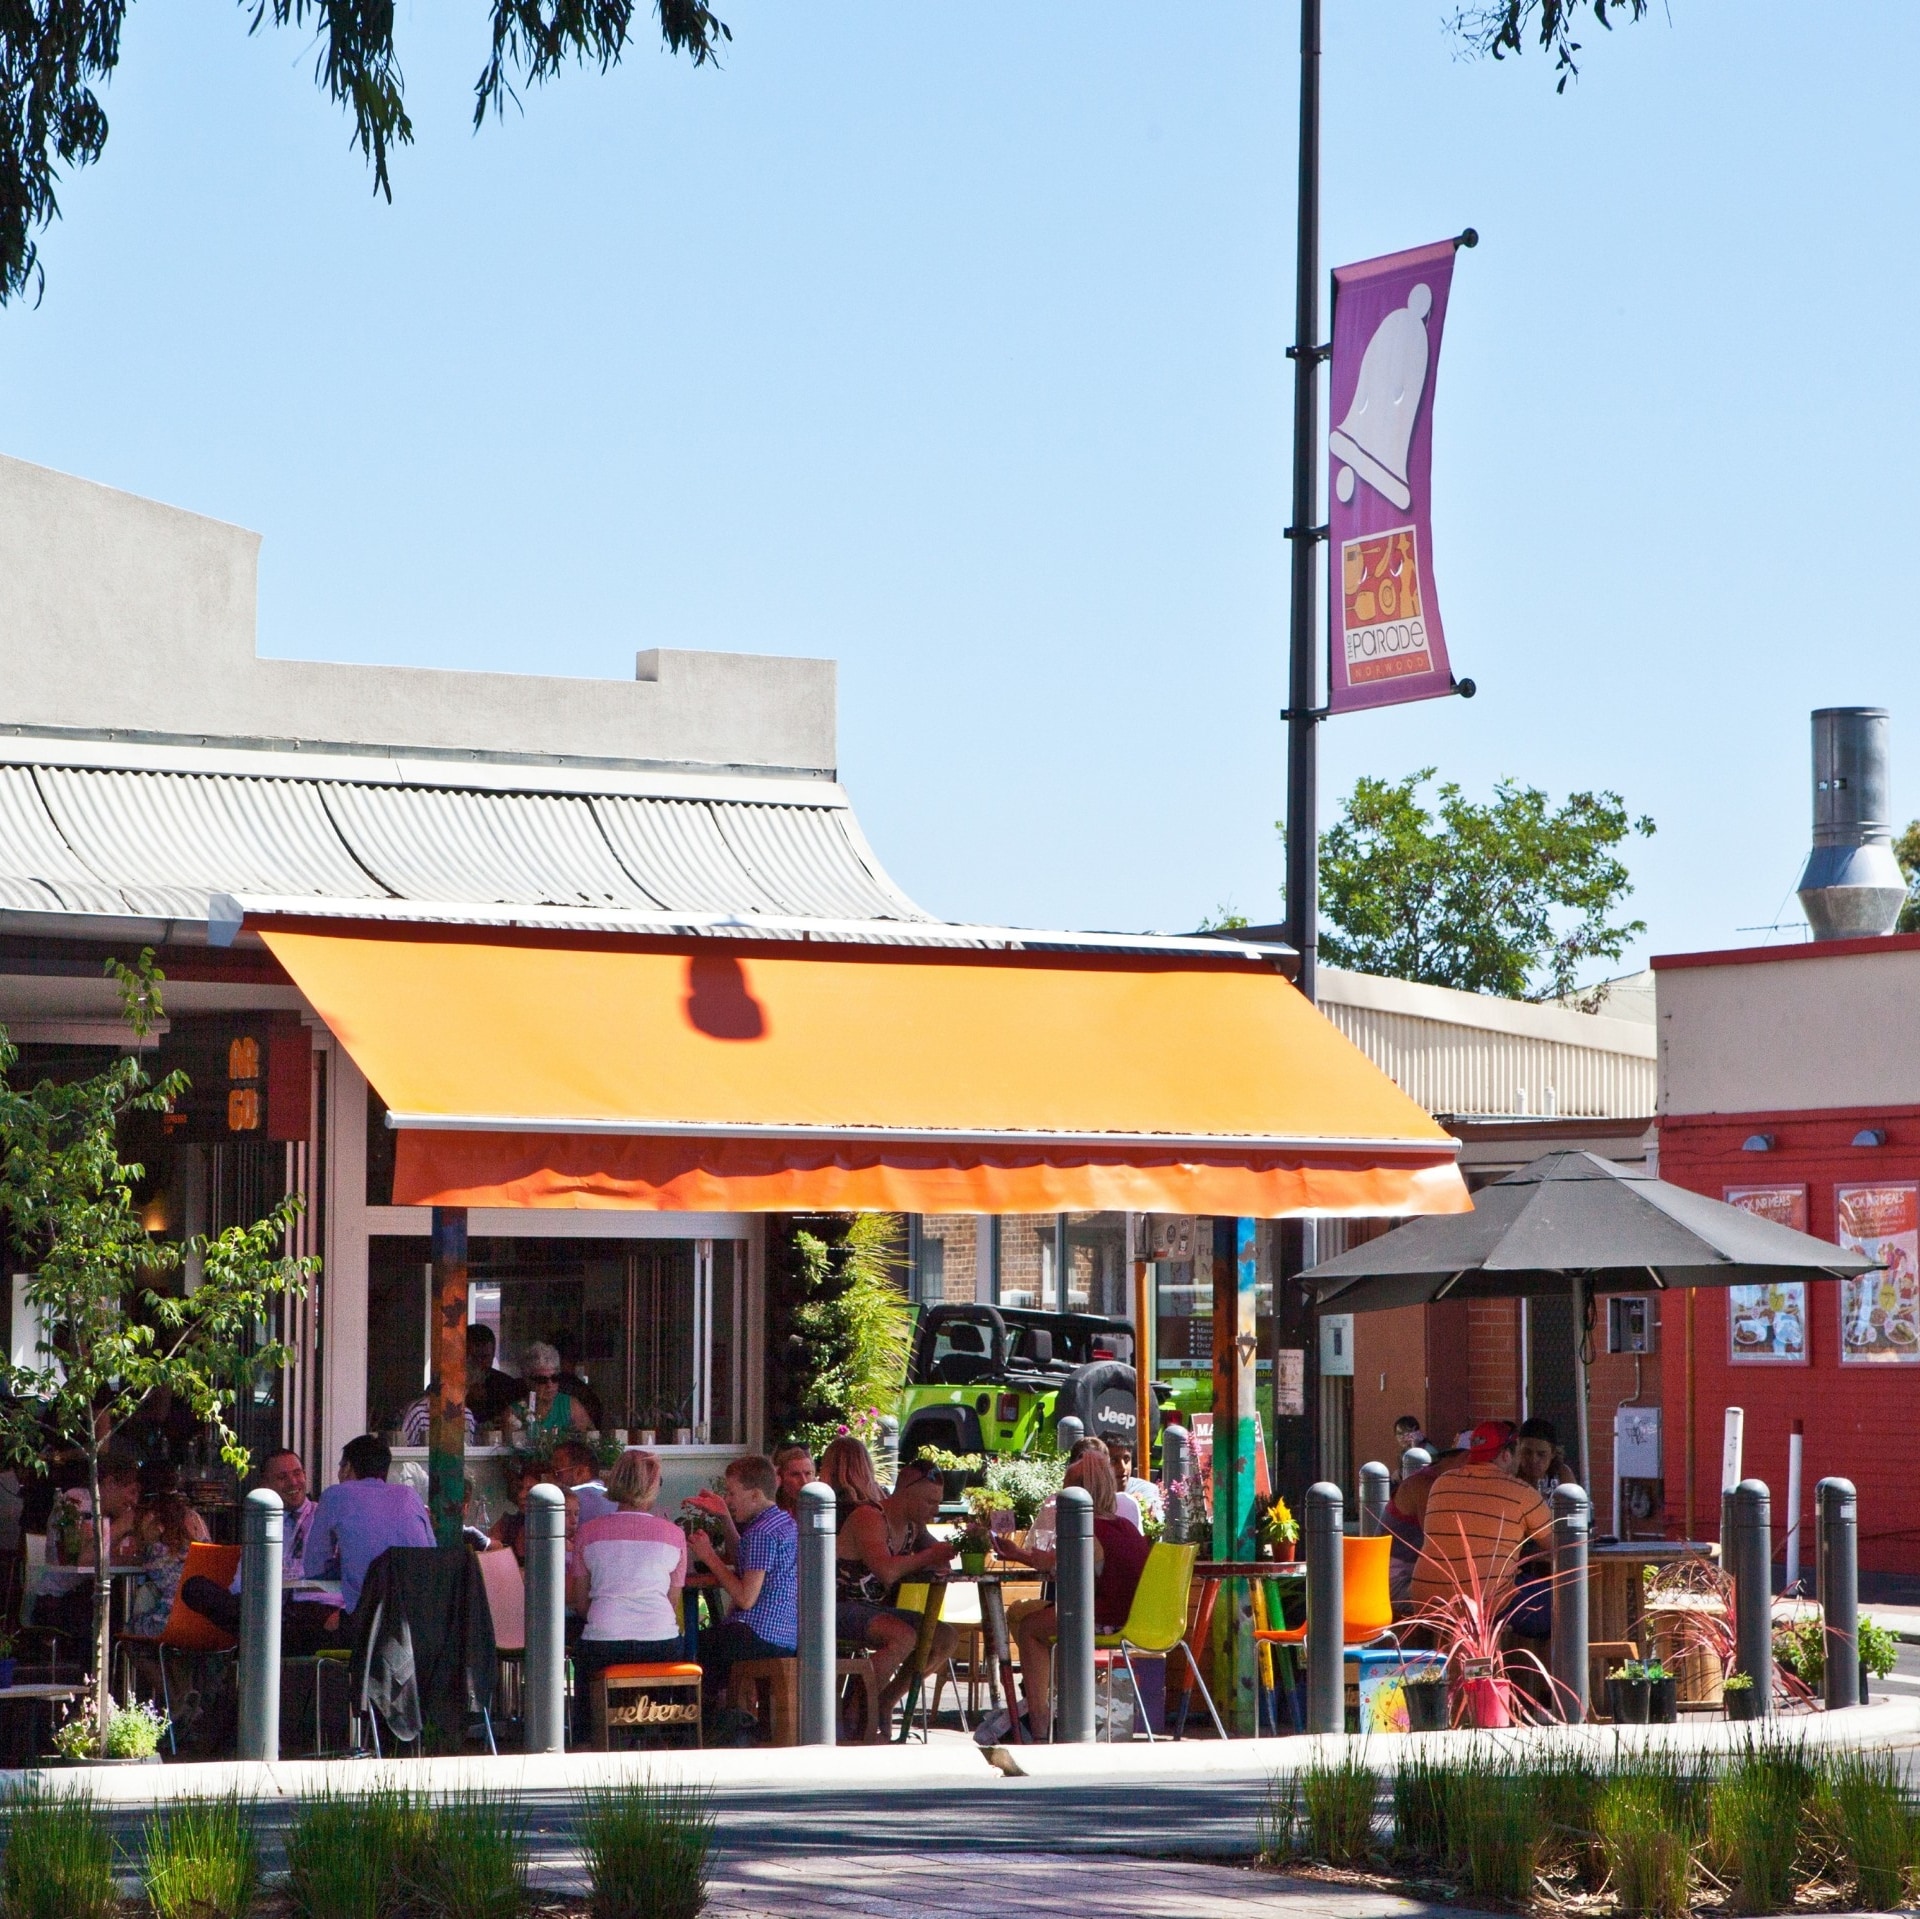  Outdoor seating at Argo on the Parade in Norwood © South Australian Tourism Commission